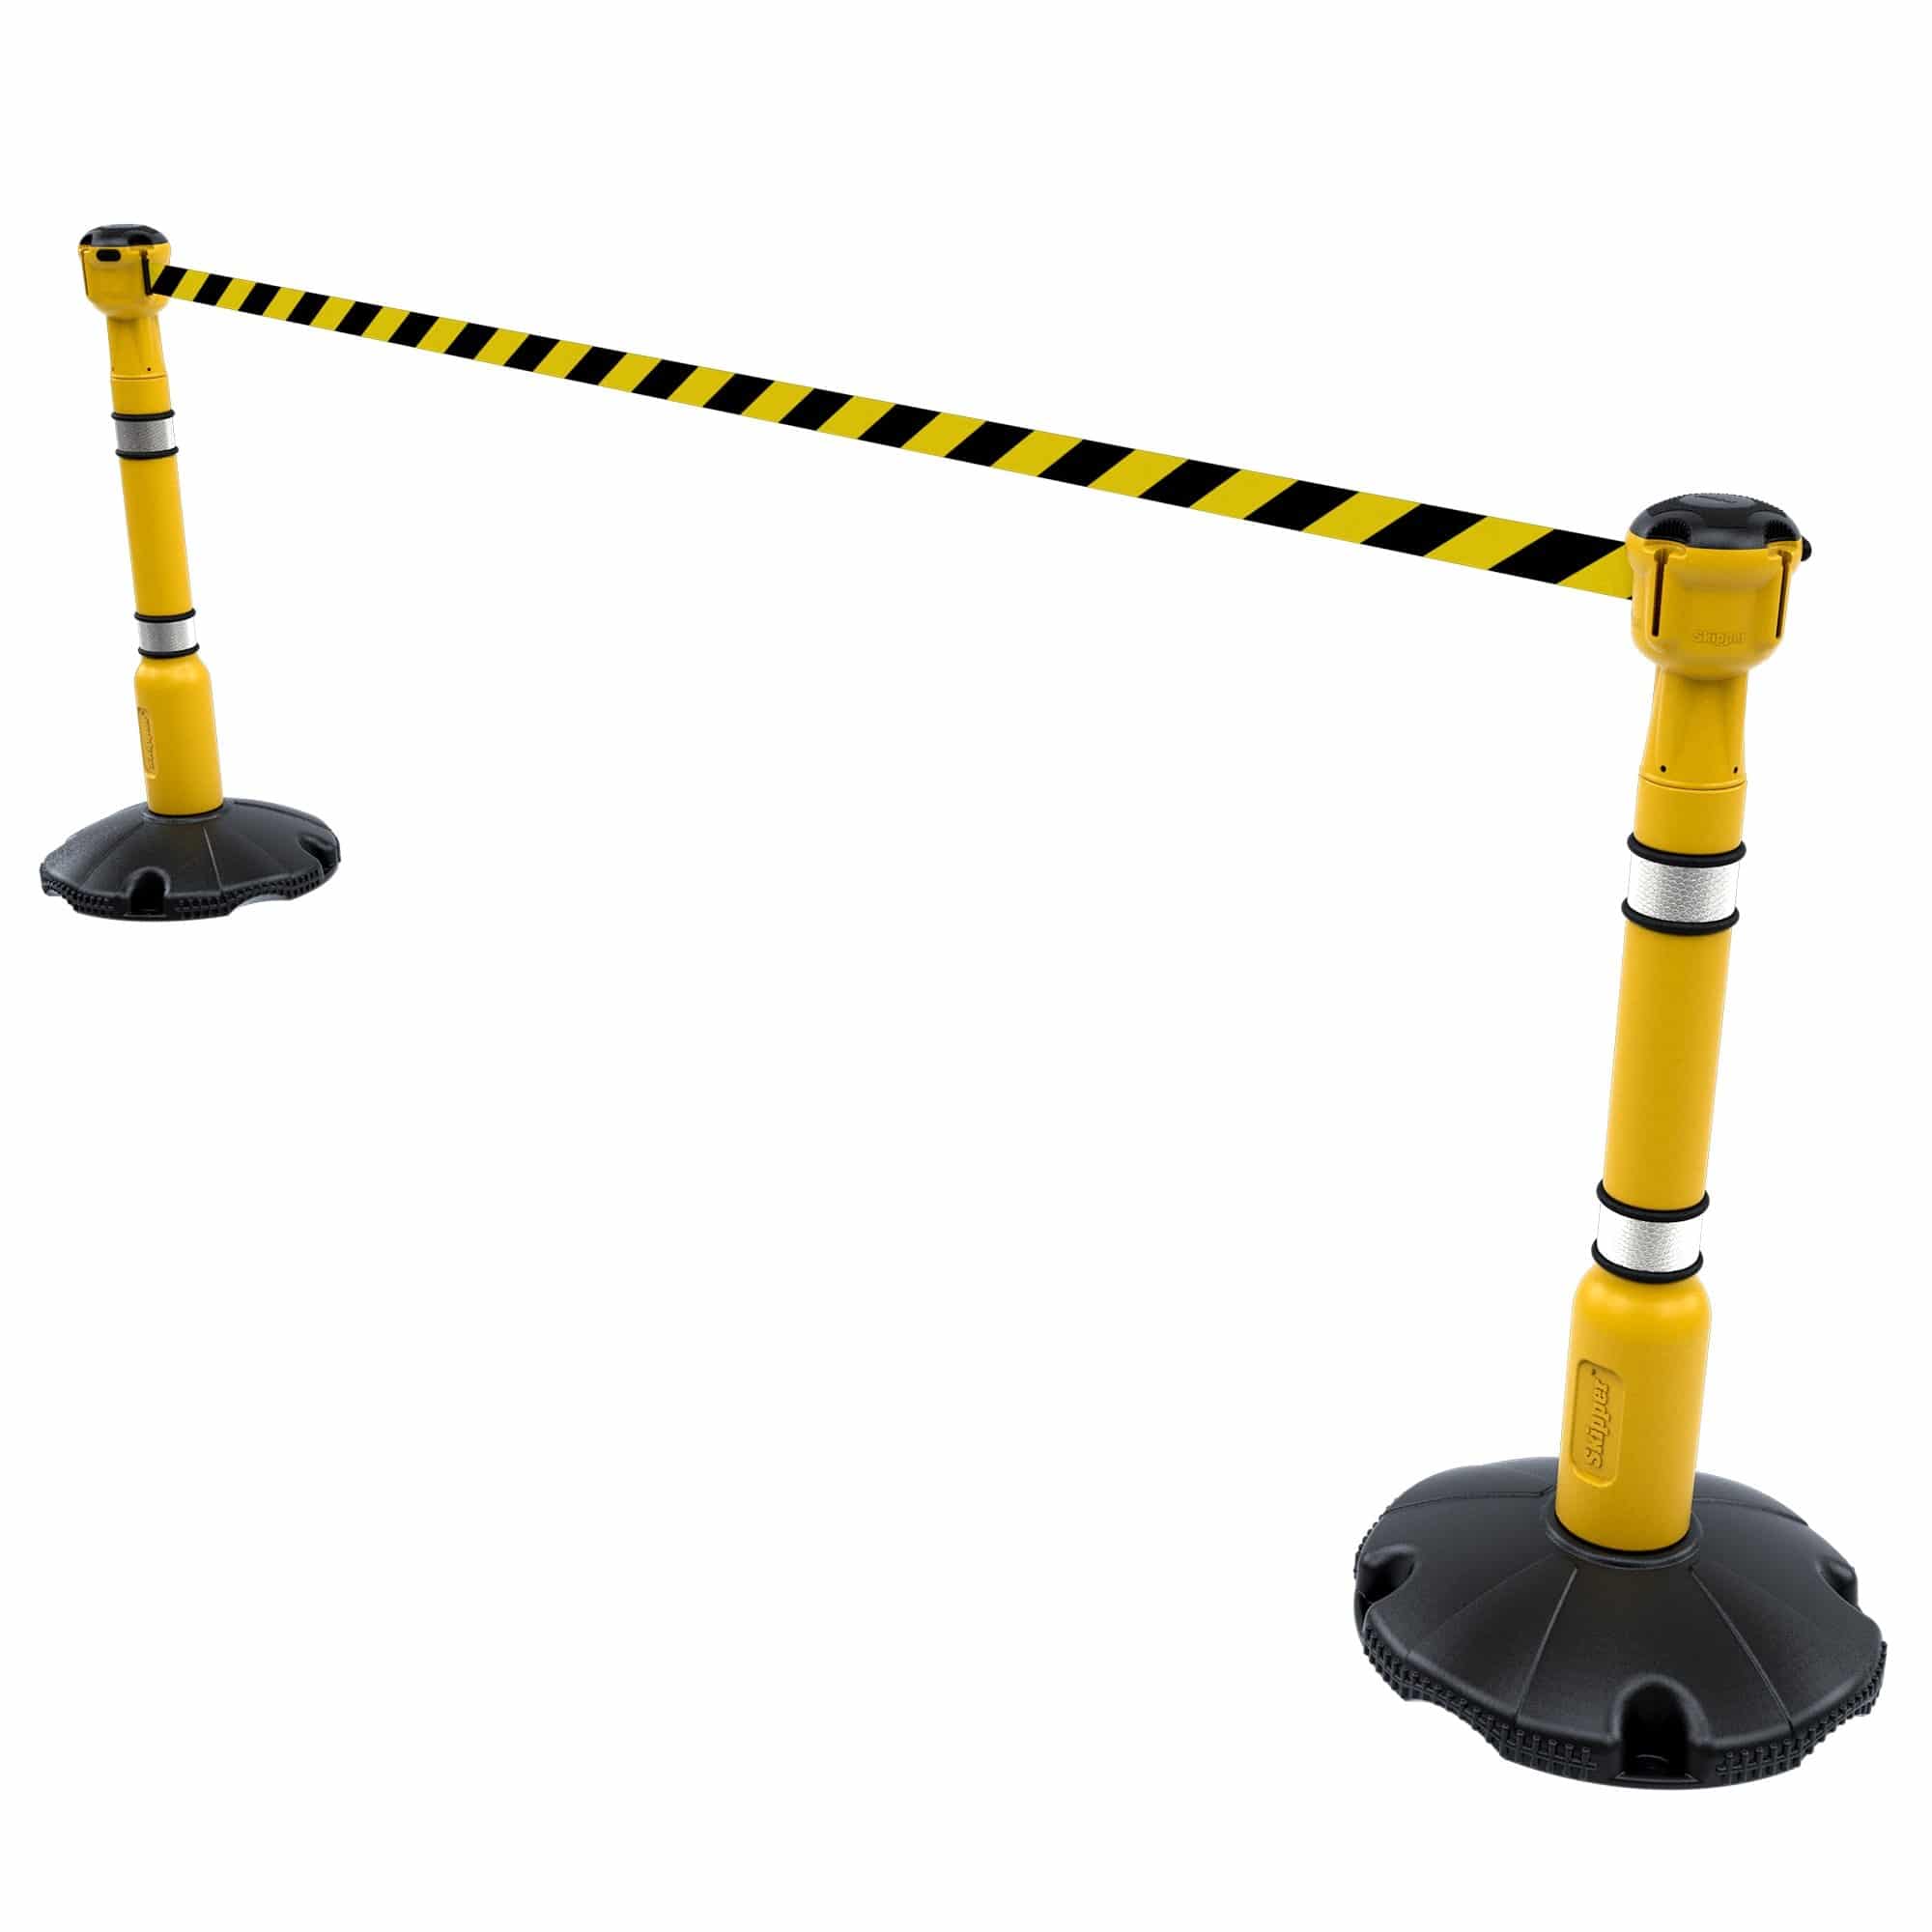 Skipper 9m Retractable Safety Barrier Complete Kit - Kit10 Retractable > Crowd Barrier > Tensa > Skipper One Stop For Safety Yellow Black & Yellow Chevron 